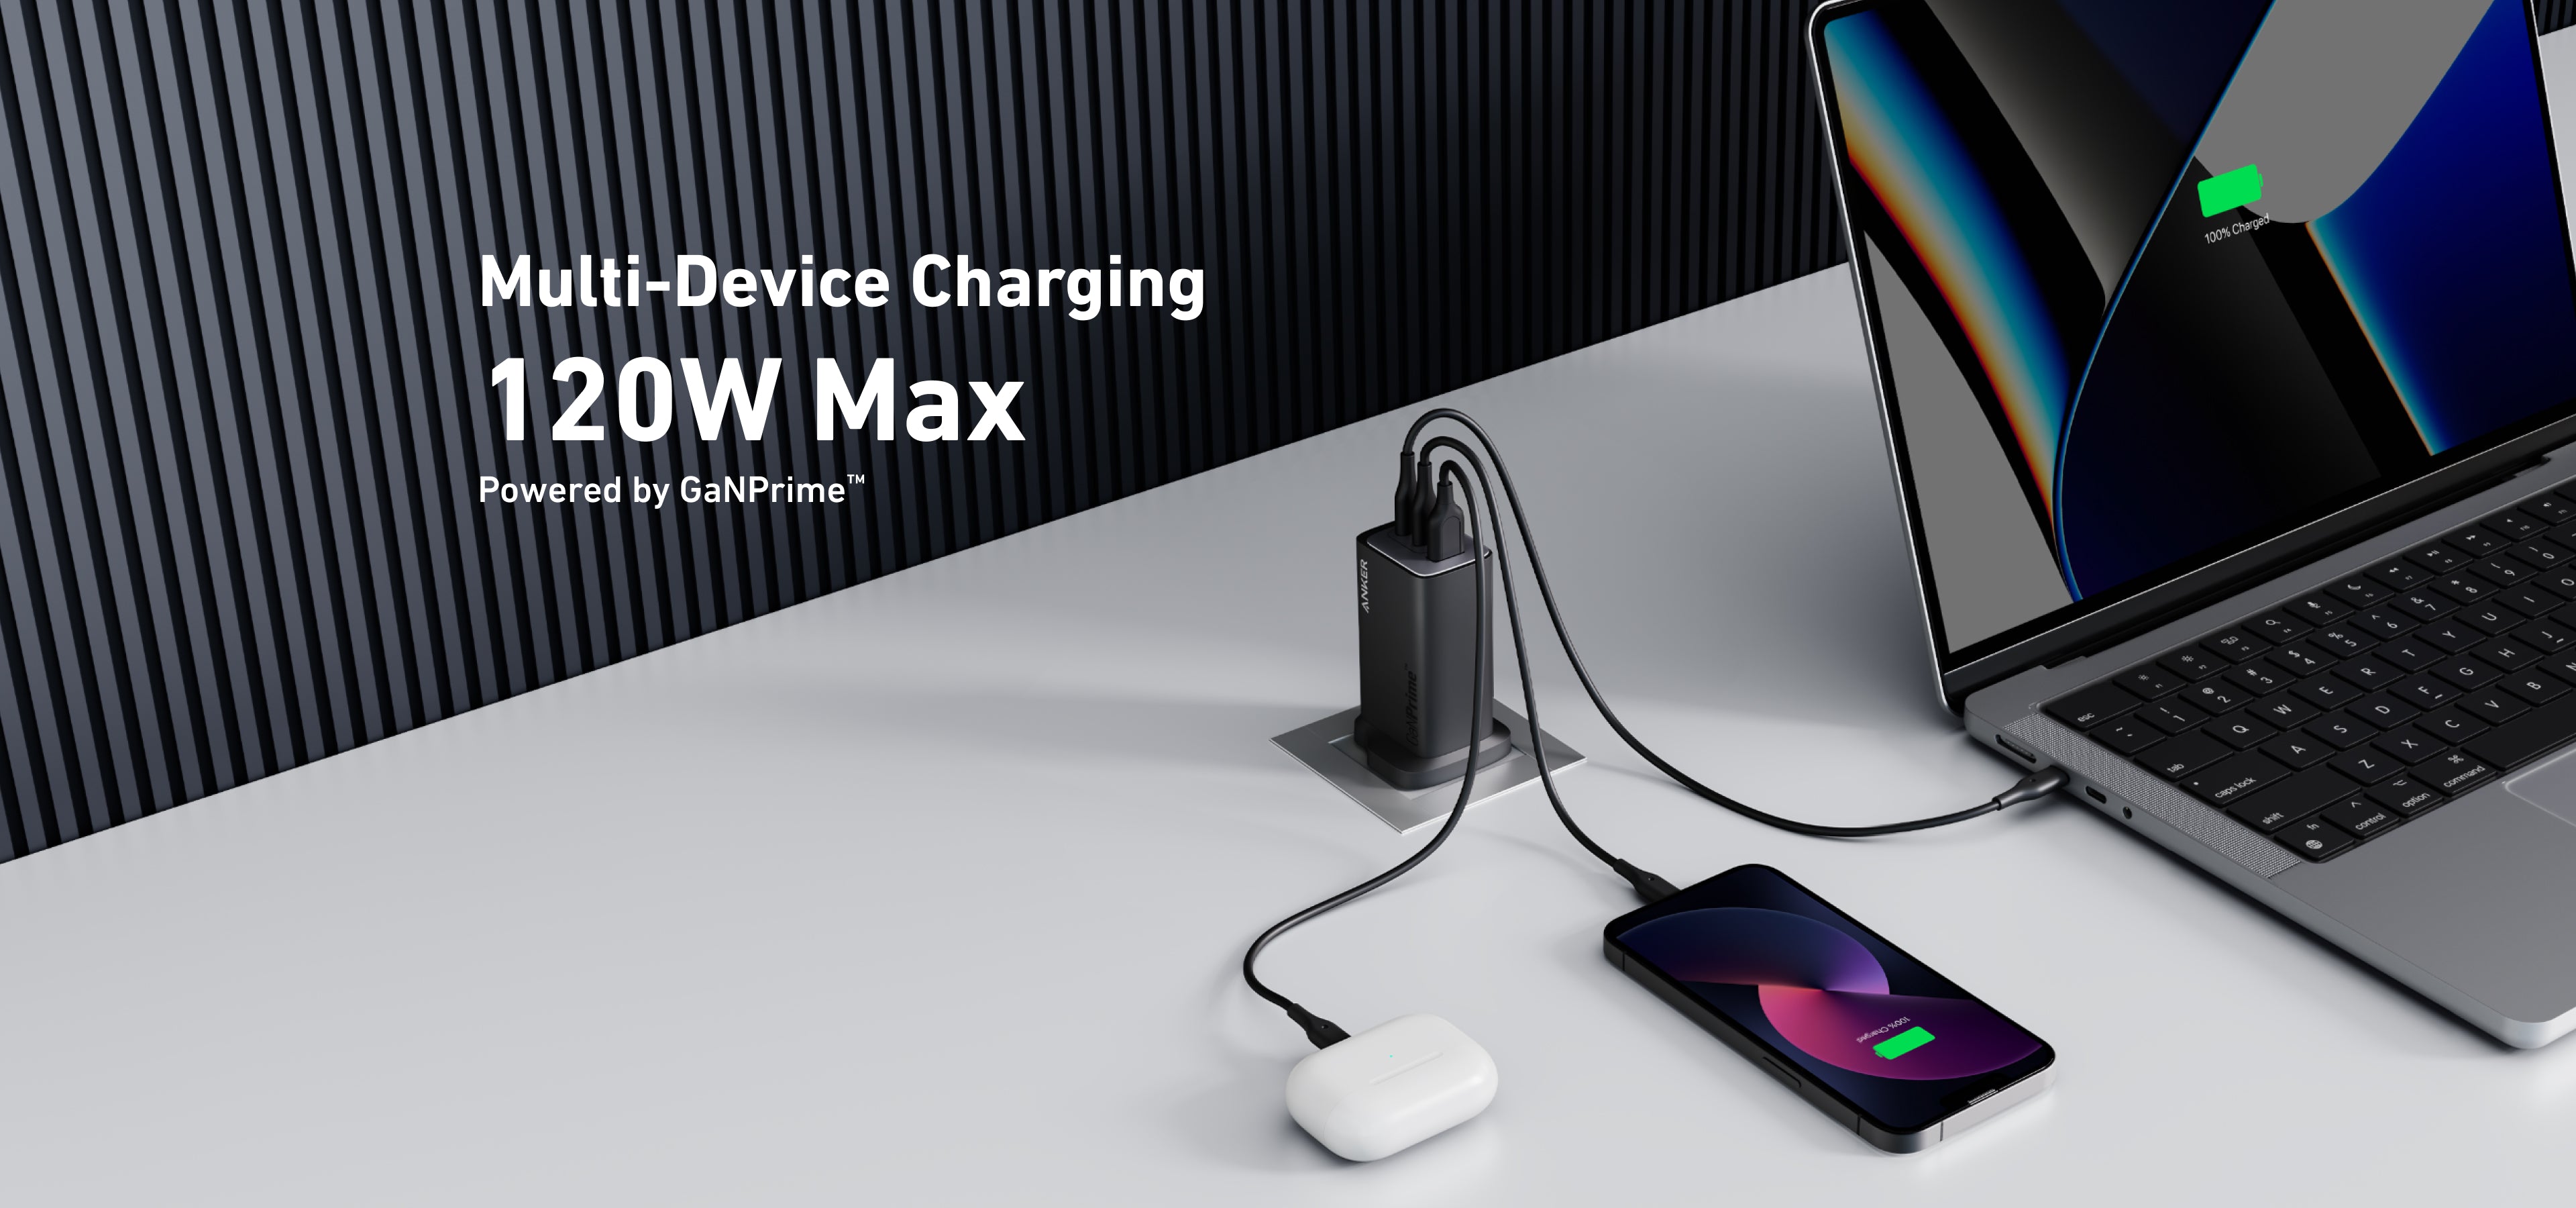 Anker &Lt;Ul&Gt; &Lt;Li&Gt;&Lt;Strong&Gt;P&Lt;/Strong&Gt;&Lt;Strong&Gt;Ower 3 Devices At Once:&Lt;/Strong&Gt; With 2 Usb-C Ports And One Usb-A Port, You Can Charge Your Phone, Tablet, And Notebook All At Once From A Single Charger. Connect A Single Device To Charge At Up To 100W.&Lt;/Li&Gt; &Lt;/Ul&Gt; &Lt;Ul&Gt; &Lt;Li&Gt;&Lt;Strong&Gt;Charge Up To 26 Minutes Faster:&Lt;/Strong&Gt; Our Exclusive Poweriq 4.0 Technology Features Dynamic Power Distribution, Which Detects The Power Needs Of Connected Devices And Adjusts Power Automatically To Ensure Faster, More Efficient Charging.&Lt;/Li&Gt; &Lt;/Ul&Gt; &Lt;Ul&Gt; &Lt;Li&Gt;&Lt;Strong&Gt;Activeshield 2.0: &Lt;/Strong&Gt;Anker'S Proprietary Technology Enhances Protection By Intelligently Monitoring Temperature Over 3 Million Times Per Day And Adjusting Power Output To Safeguard Your Connected Devices.&Lt;/Li&Gt; &Lt;/Ul&Gt; &Lt;Ul&Gt; &Lt;Li&Gt;&Lt;Strong&Gt;Greener With Gan:&Lt;/Strong&Gt; If Every Household In The Us Used Our Ganprime™ Products In Place Of Non-Ganprime™ Products, The Amount Of Power Saved Could Be Up To 796.39 Million Kwh Per Year—That'S Enough Energy To Power Hawaii For A Full Month.&Lt;/Li&Gt; &Lt;/Ul&Gt; &Lt;H5&Gt;We Also Provide International Wholesale And Retail Shipping To All Gcc Countries: Saudi Arabia, Qatar, Oman, Kuwait, Bahrain.&Lt;/H5&Gt; Anker Anker 737 Charger (Ganprime 120W)